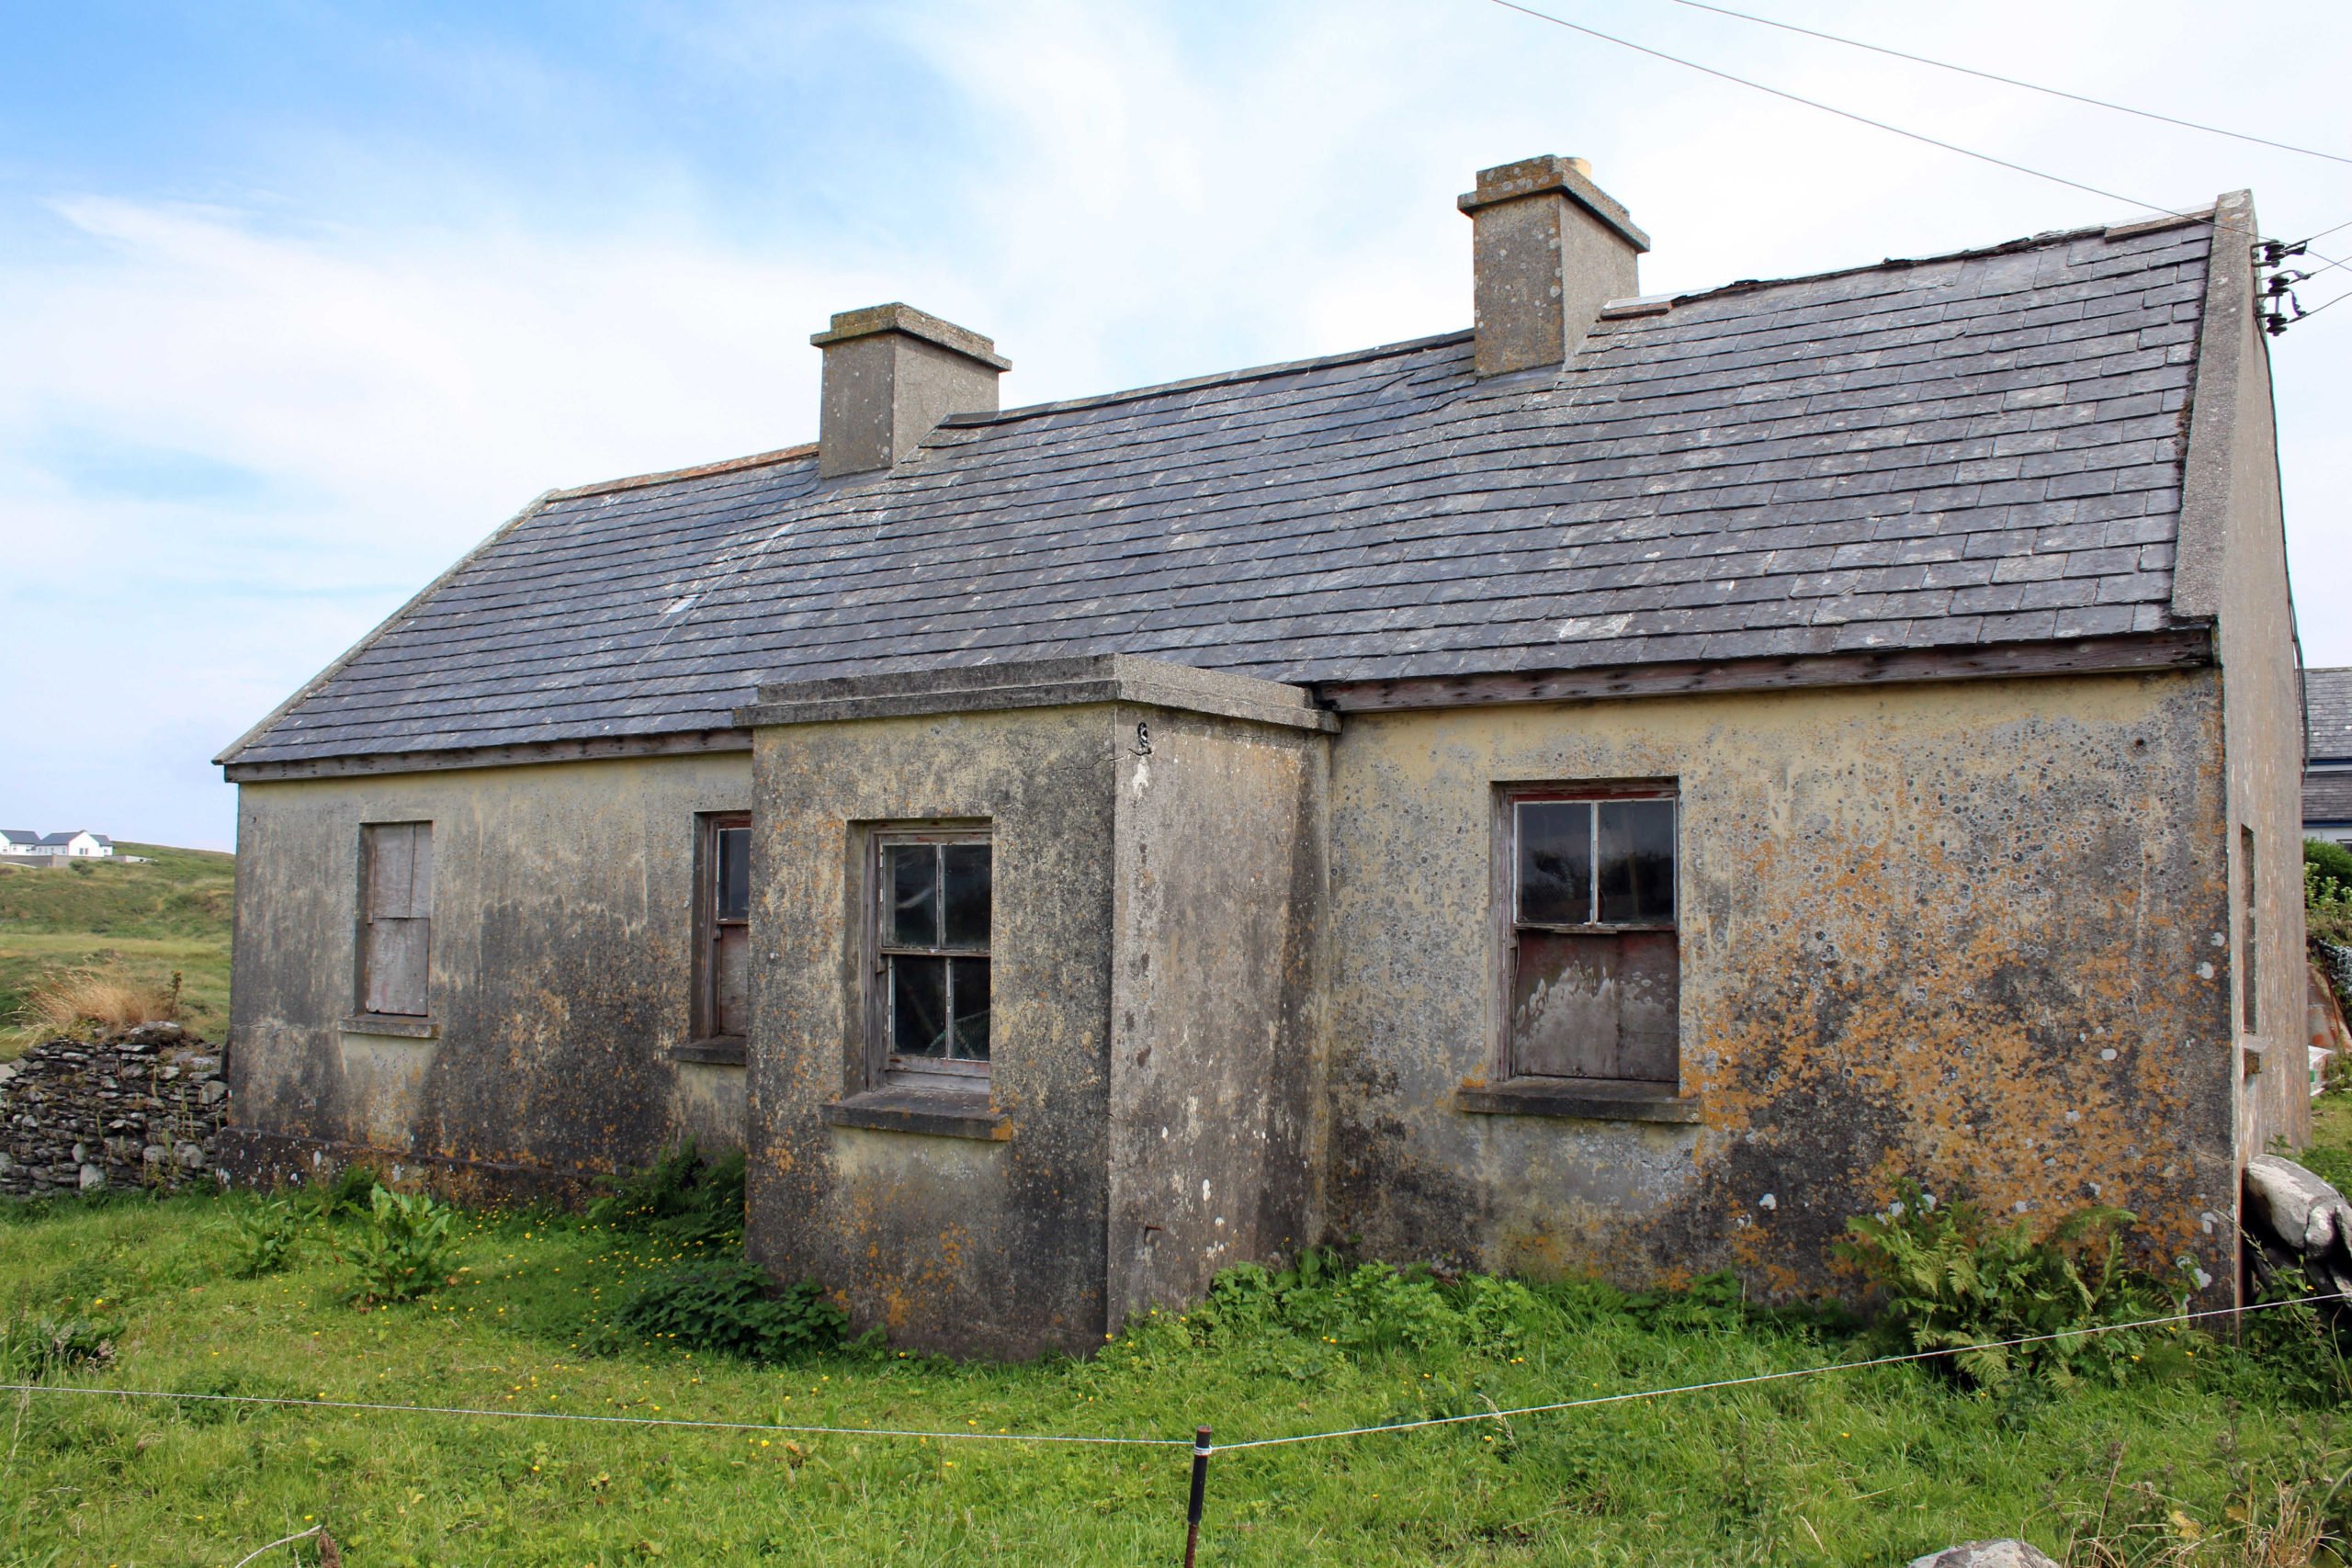 grants for home improvements in ireland